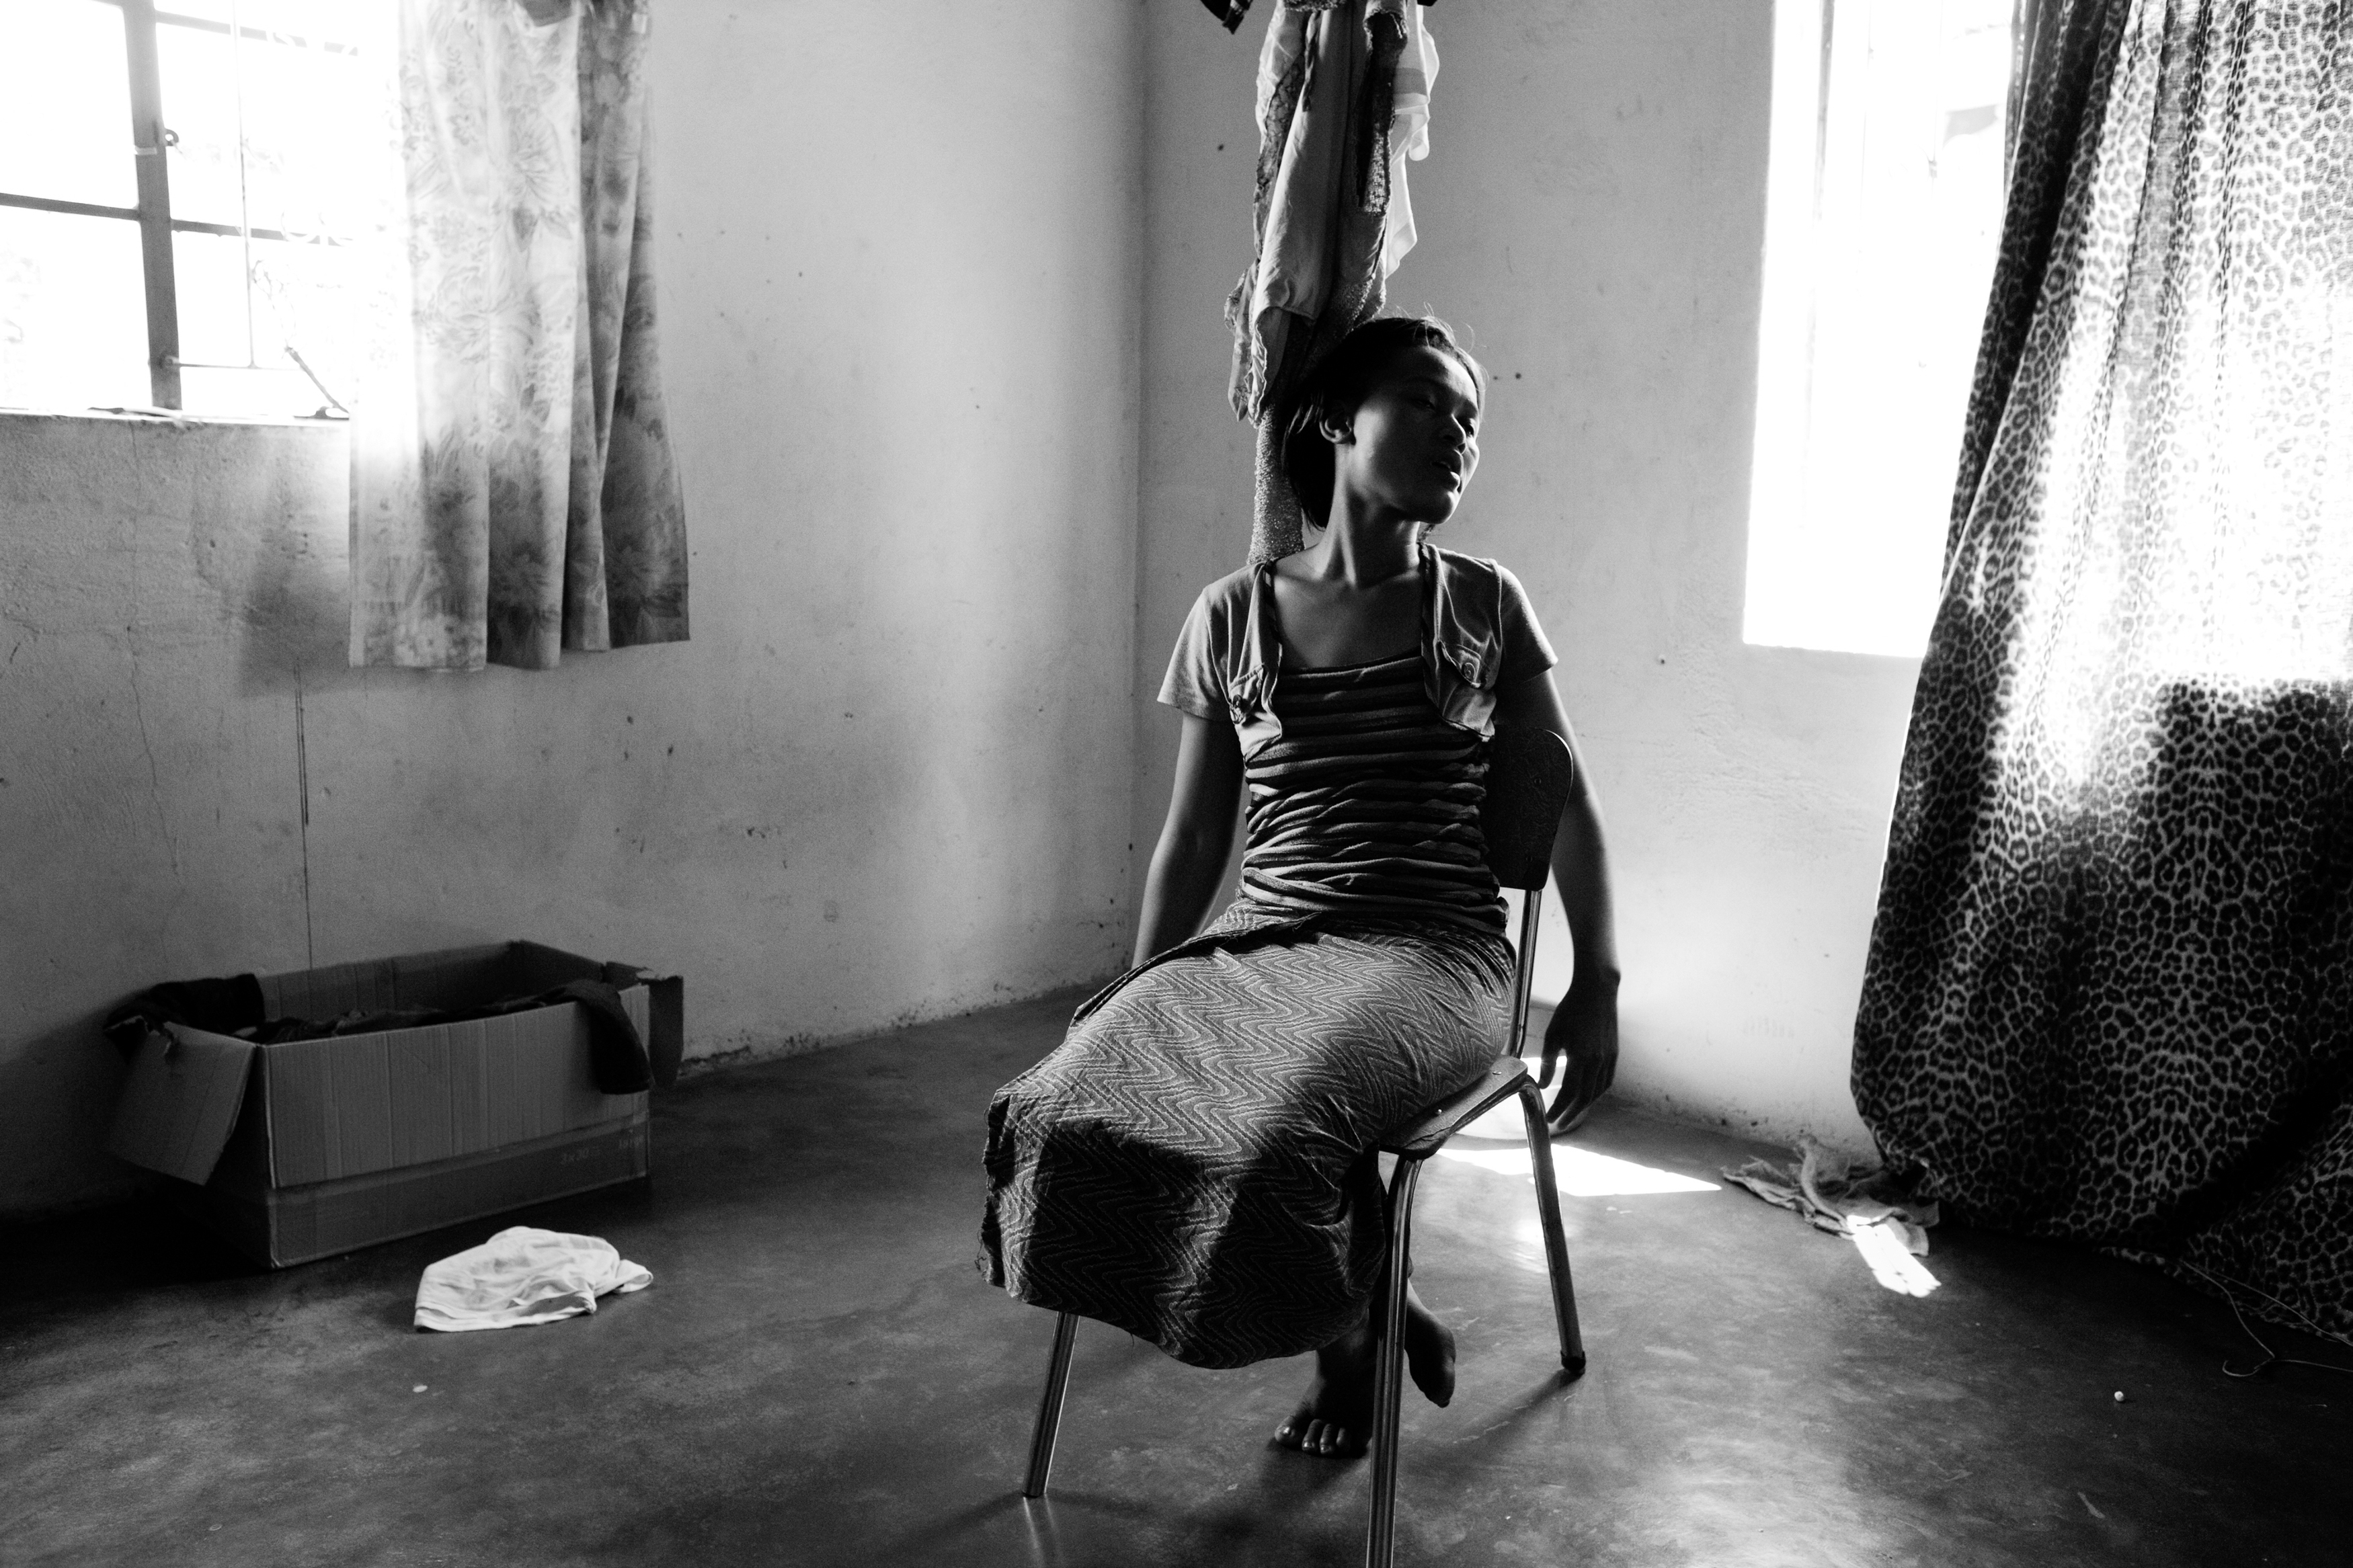 An HIV-positive woman, 20, grieves the loss of her one-year-old son due to AIDS. She is now often found alone, despondent and quiet. She refuses to begin ARV treatment due to stigma and fear.